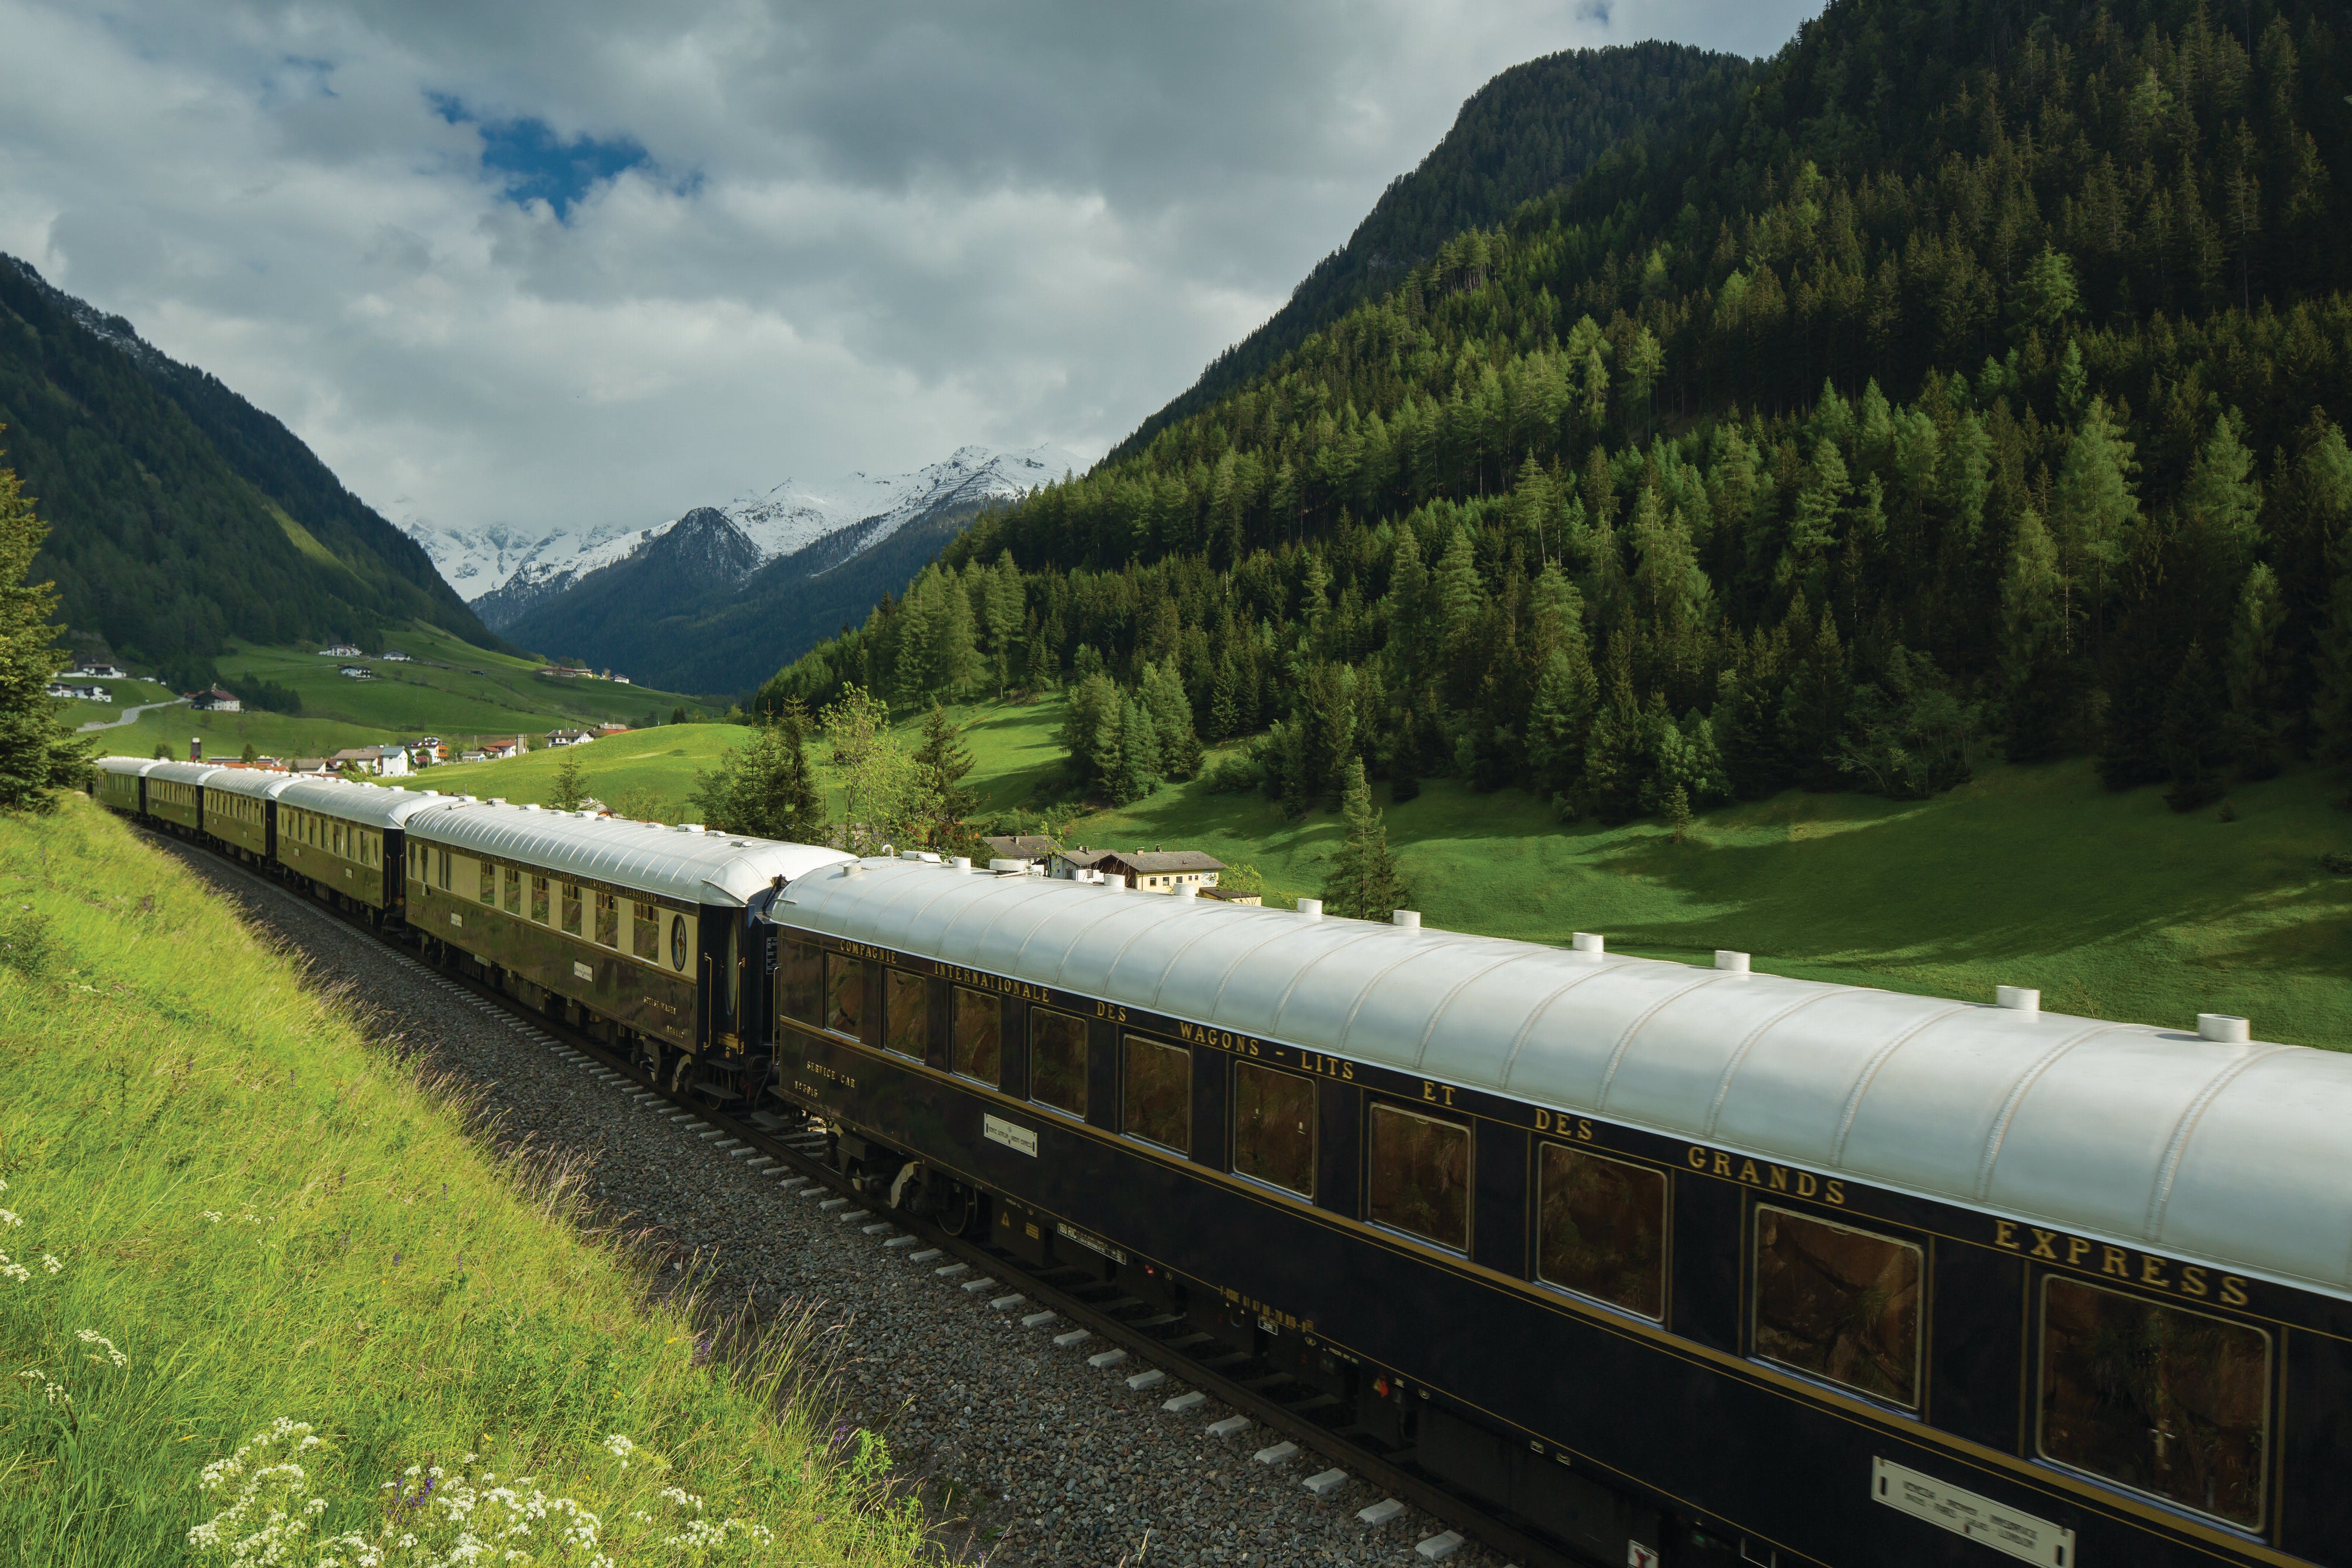 venice simplon-orient-express: all aboard the most glamorous train journey in the world